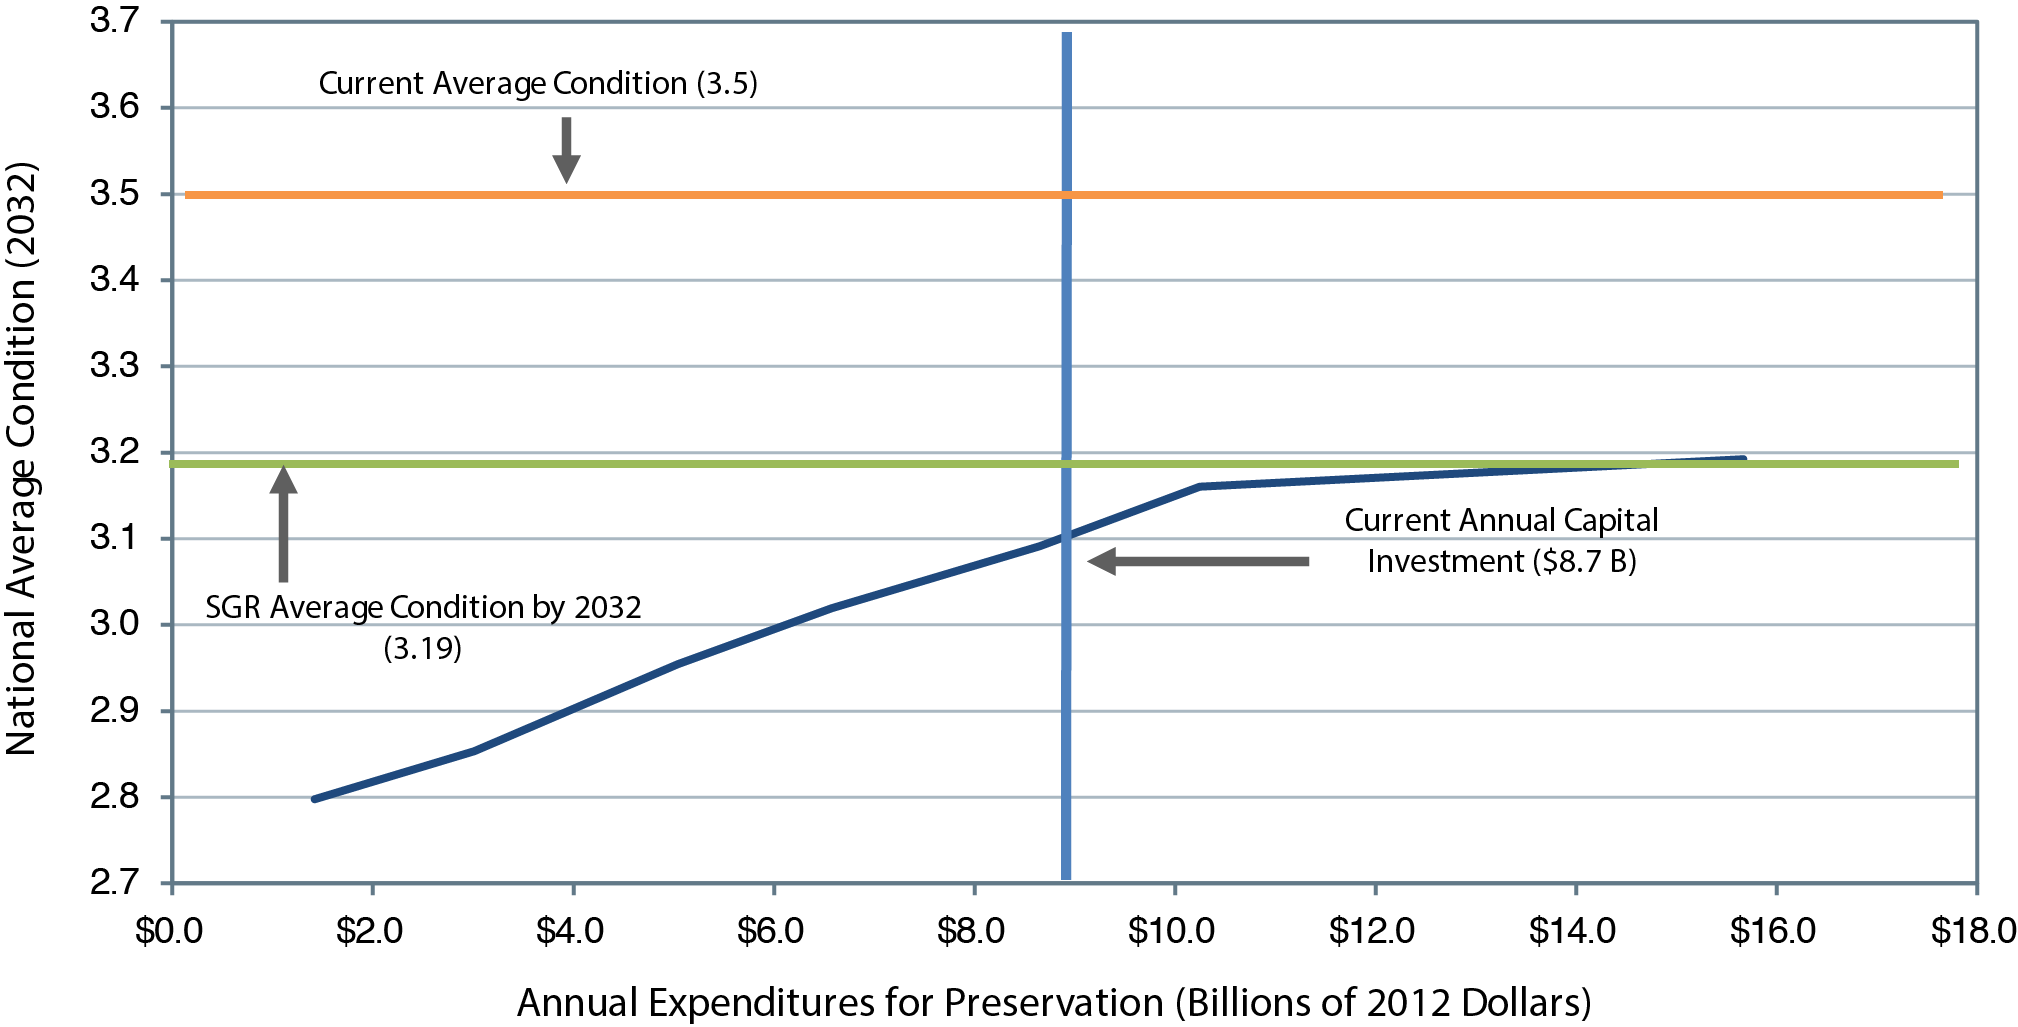 A line chart plots national average condition rating over annual expenditures for preservation in billions of 2012 dollars. The plot has an initial rating of 2.80 at an annual expenditure of $1.4 billion. The trend is steadily upward to a value of 3.16 at an average annual investment of $10.2 billion, and levels off to reach a value of 3.19 at an average annual investment of $15.7 billion. The plot intersects at a rating of 3.09 with the annual current annual capital investment of $8.7 billion. The current average condition is shown as a rating of 3.5, and the SGR average condition by 2032 is shown as a rating of 3.19. Source: Transit Economic Requirements Model.